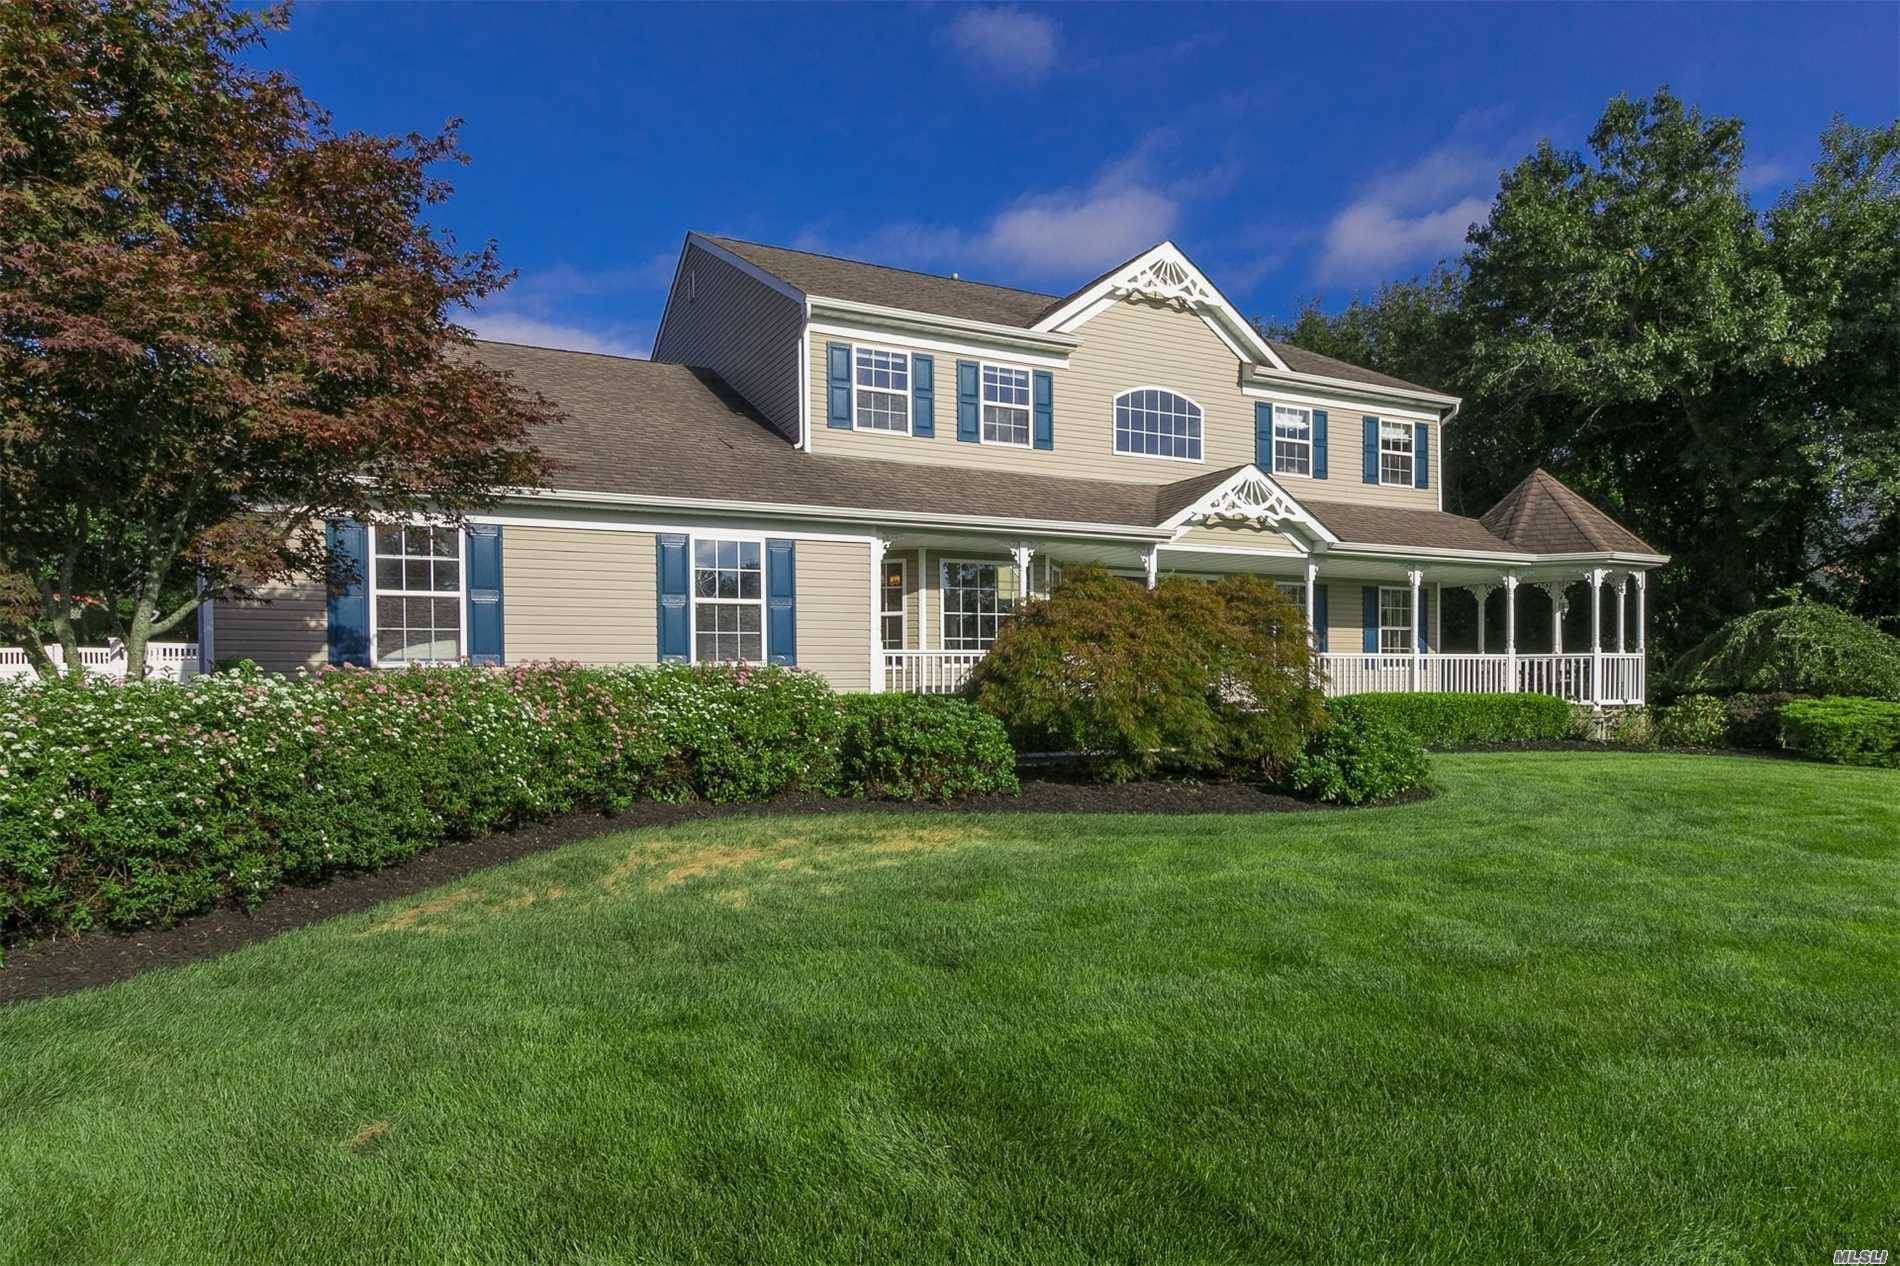 Desirable East Moriches Schools Choice Of Westhampton-Eastport South Manor Or Center Moriches!